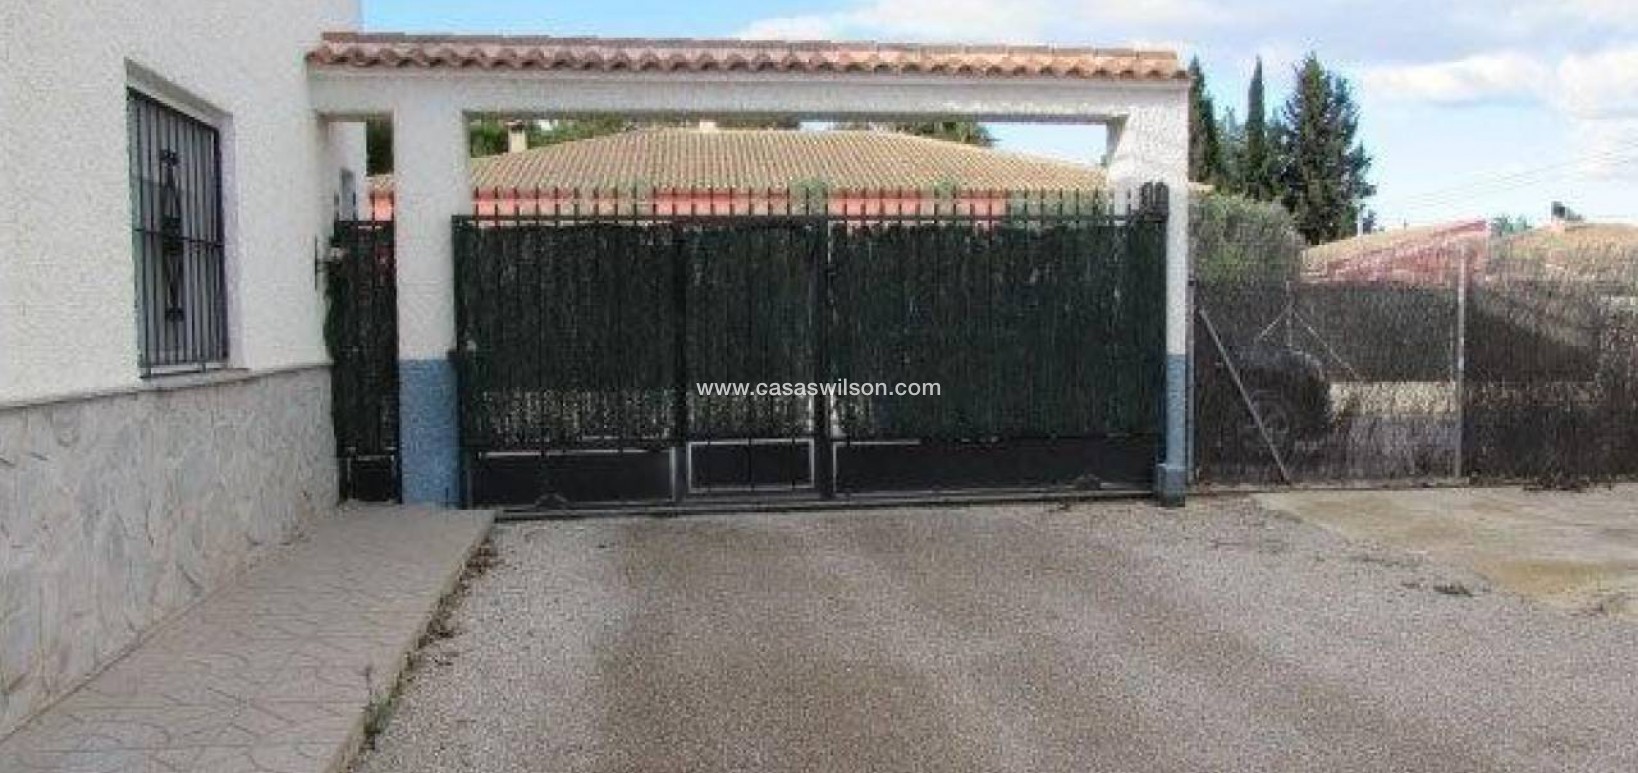 Sale - Country Property/Finca - Dolores